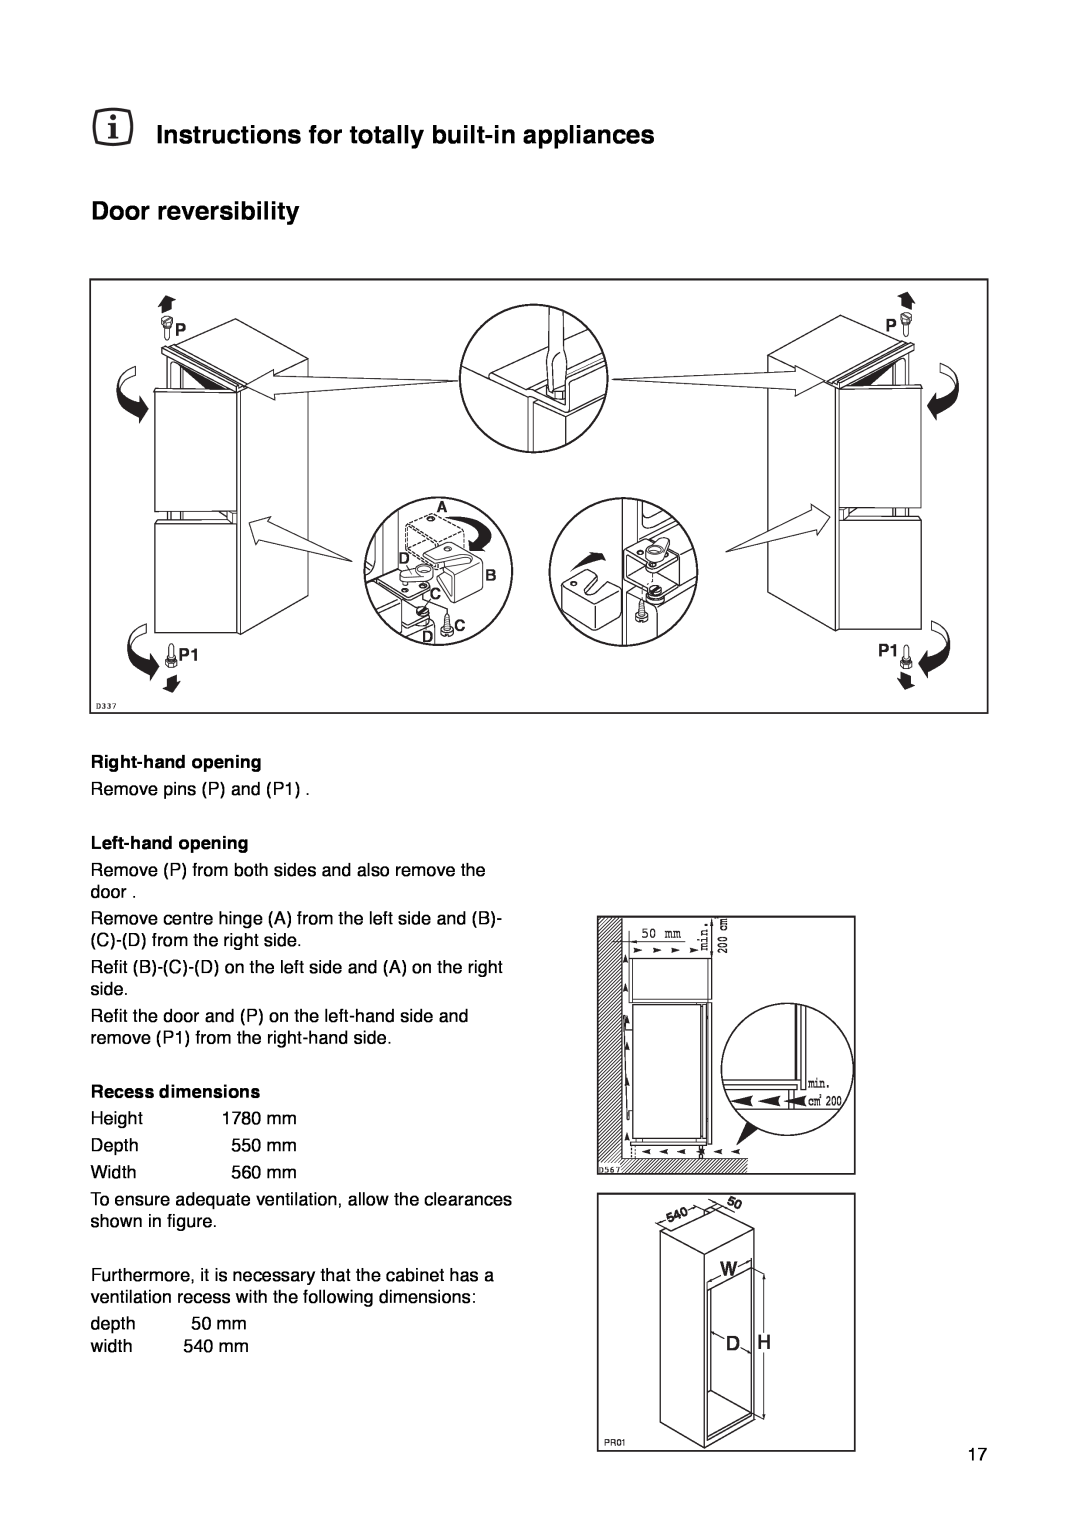 Zanussi ZI 720/8 FF Instructions for totally built-in appliances Door reversibility, Right-hand opening, Left-hand opening 